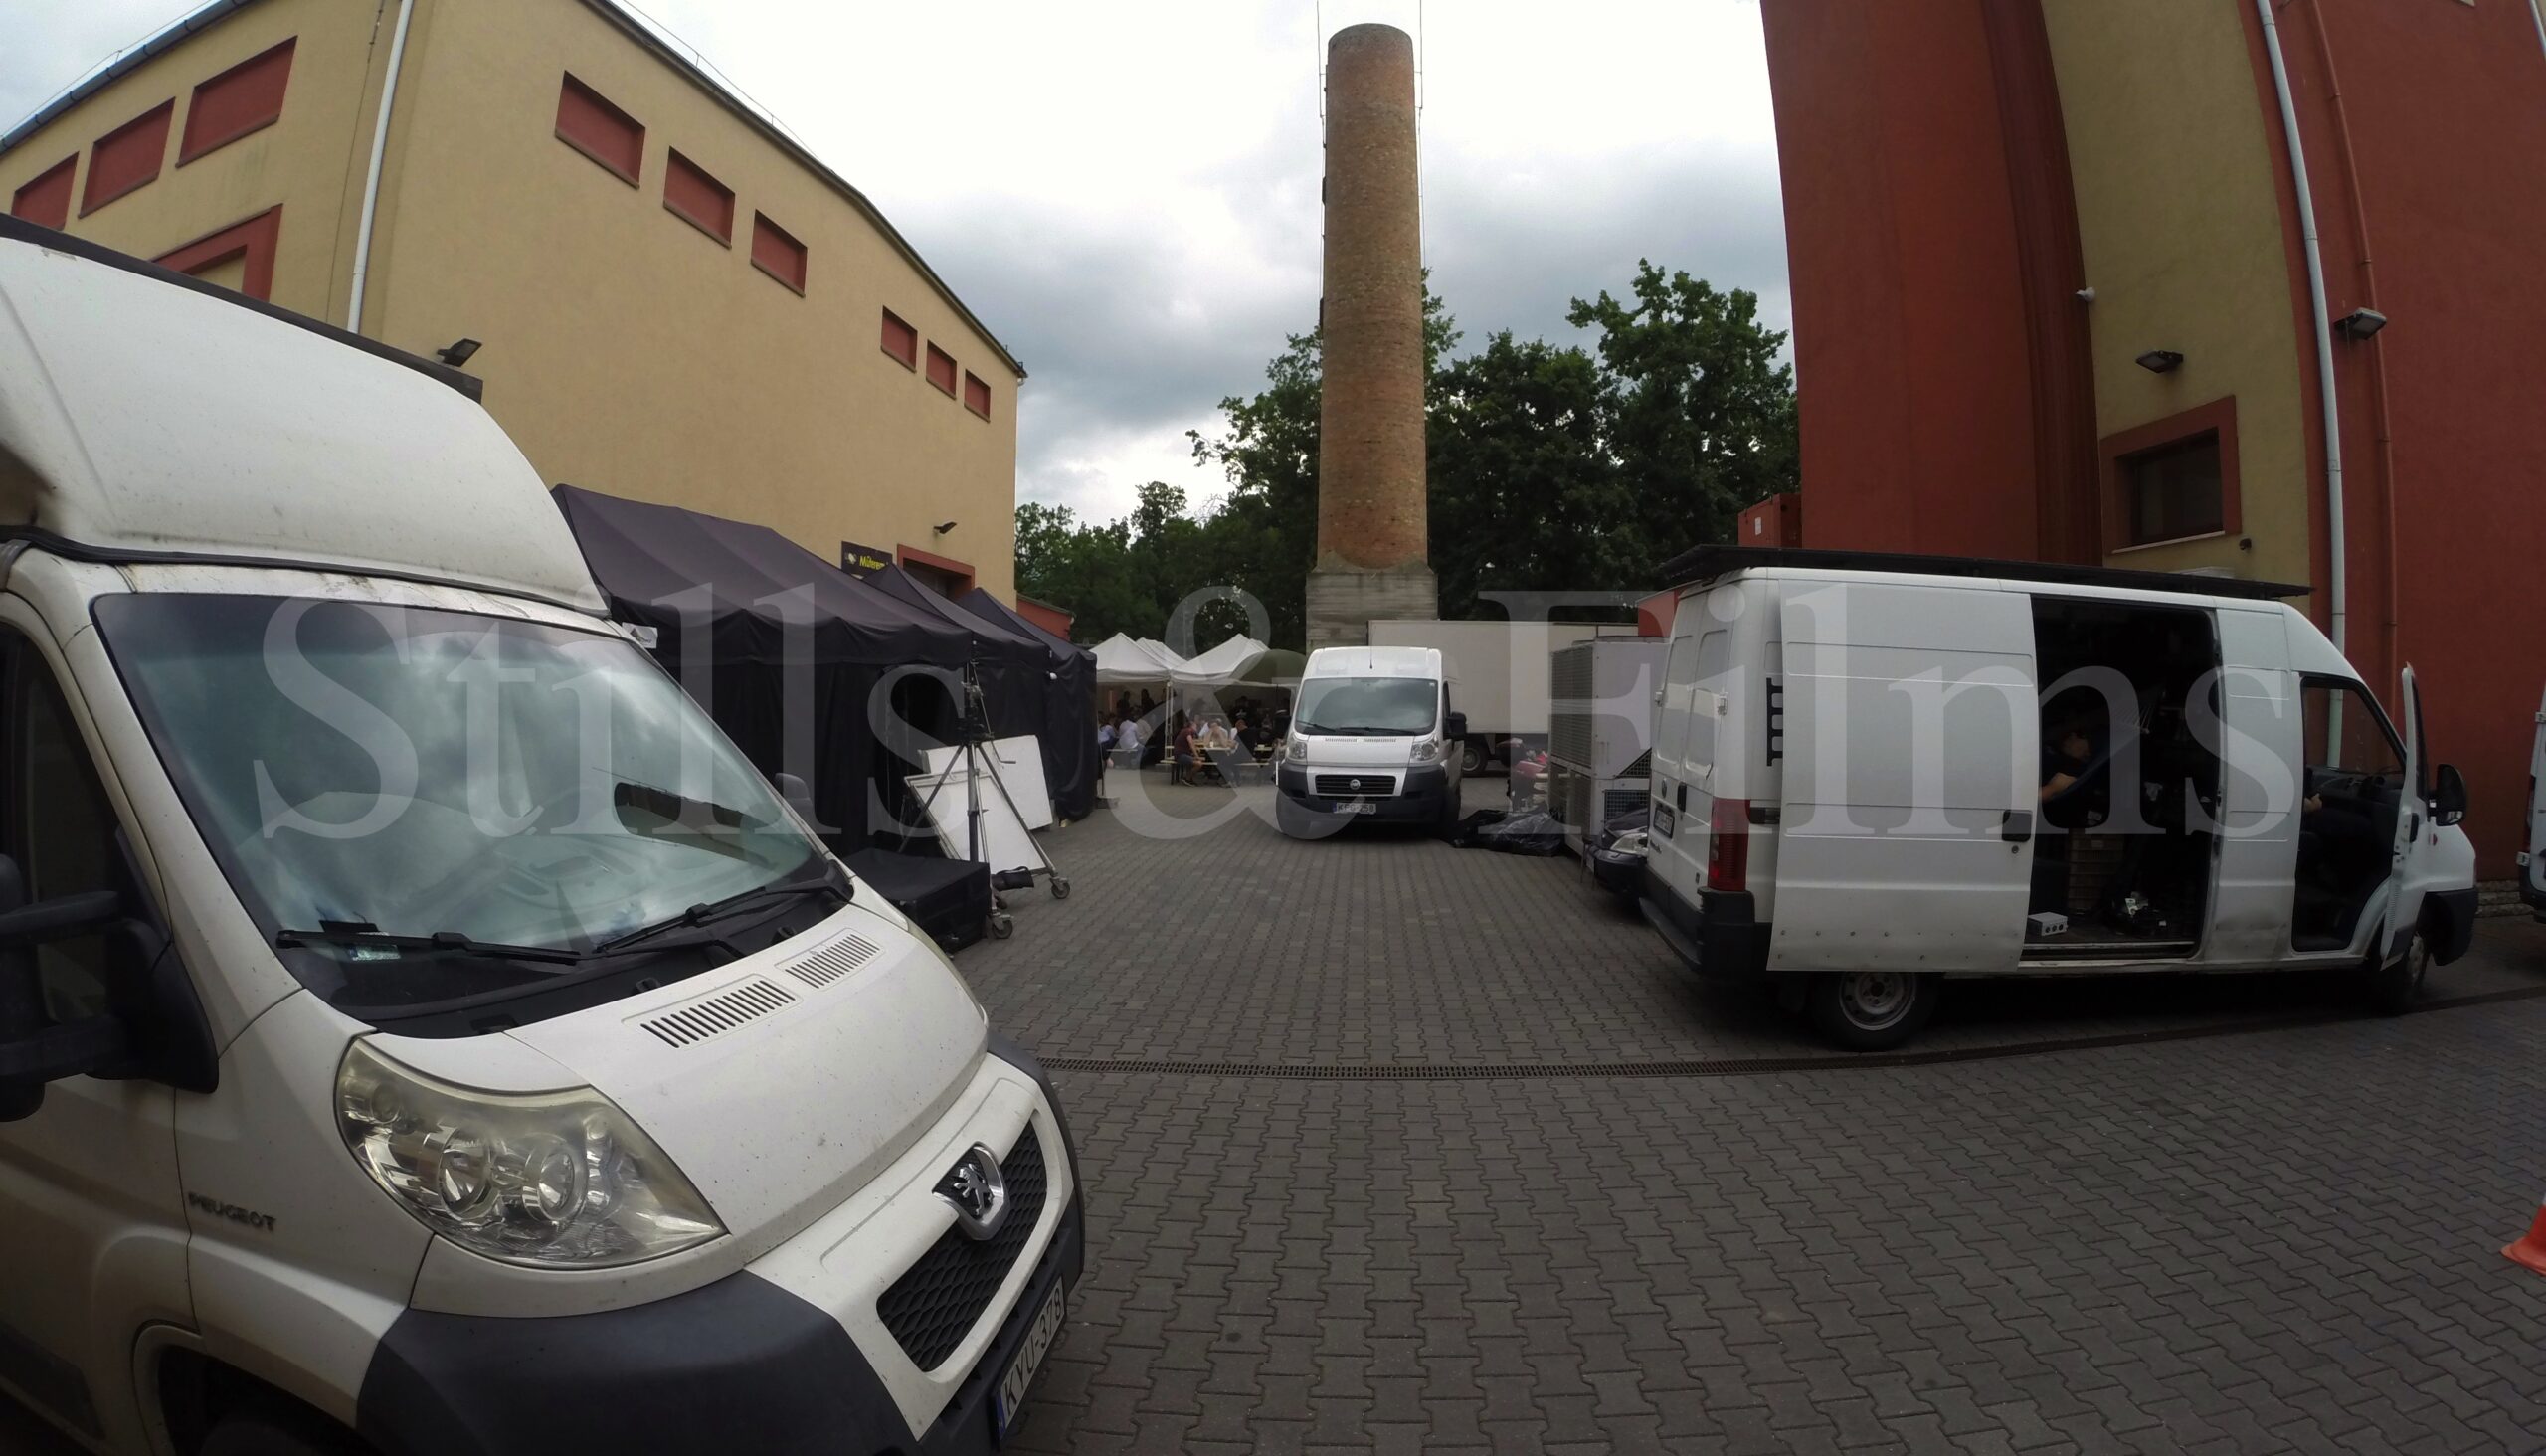 Our production vans at a film studio near Budapest, Hungary.